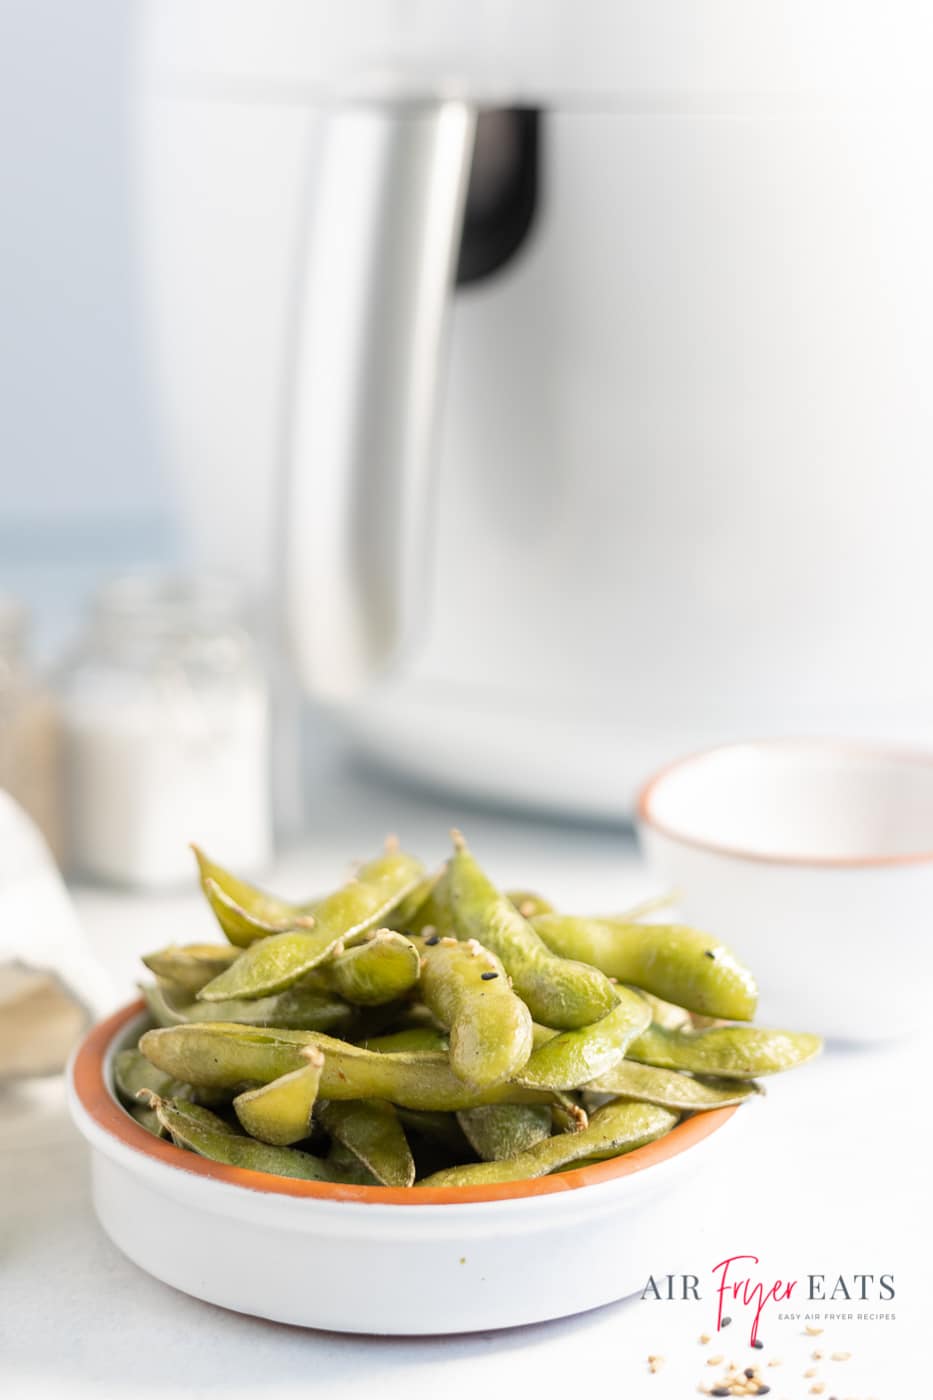 Vertical photo of a white dish containing air fryer edamame. In the background is a white air fryer. At the bottom of the photo is the company logo